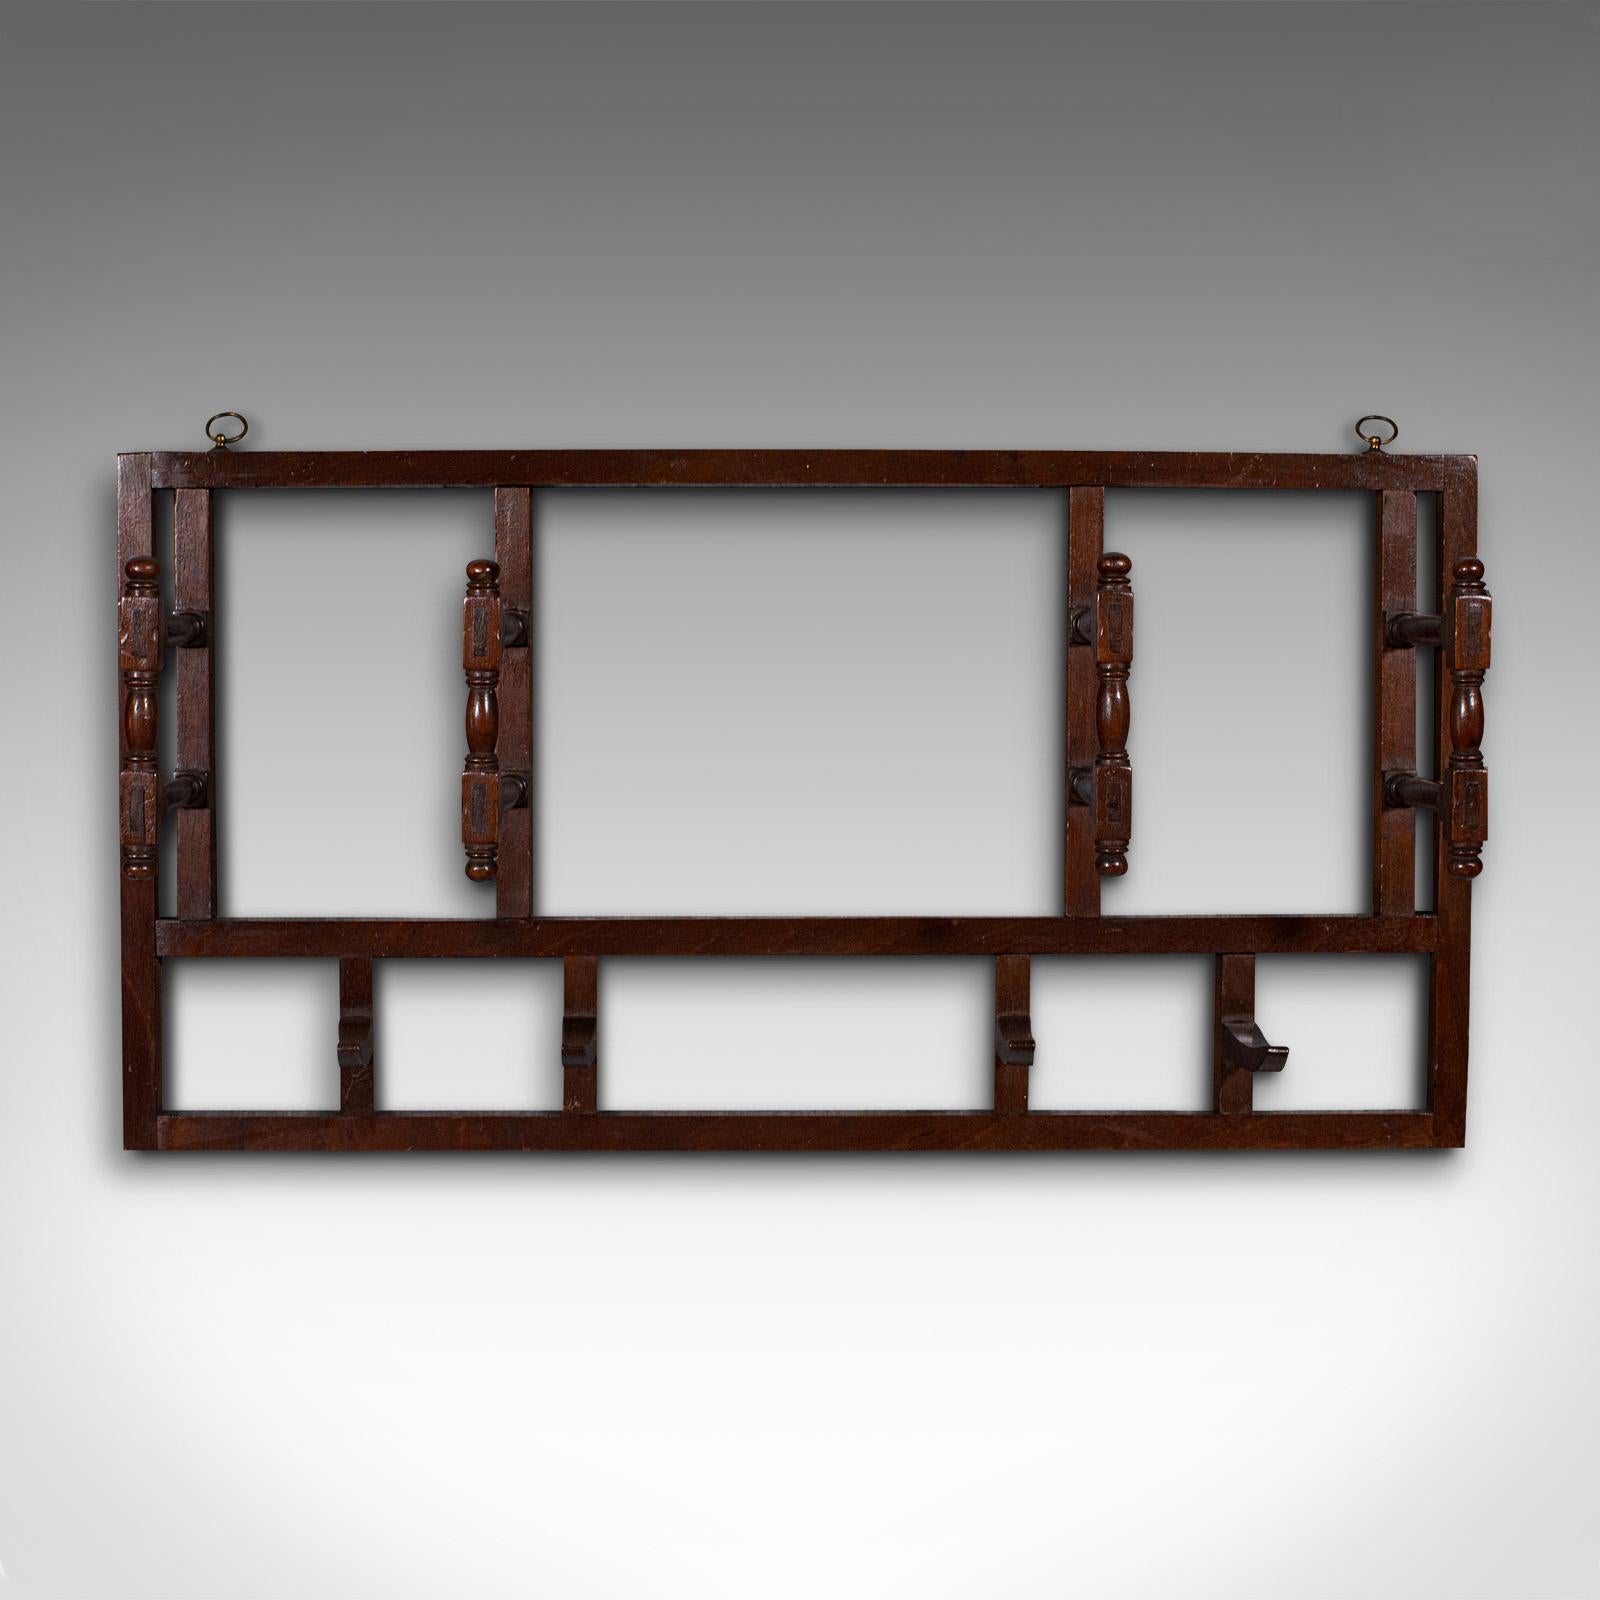 This is an antique mounted coat rack. An English, mahogany folding hallway hat and scarf hanger, dating to the Edwardian period, circa 1910.

Of ideal proportion for the smaller abode
Displays a desirable aged patina and in good order
Select